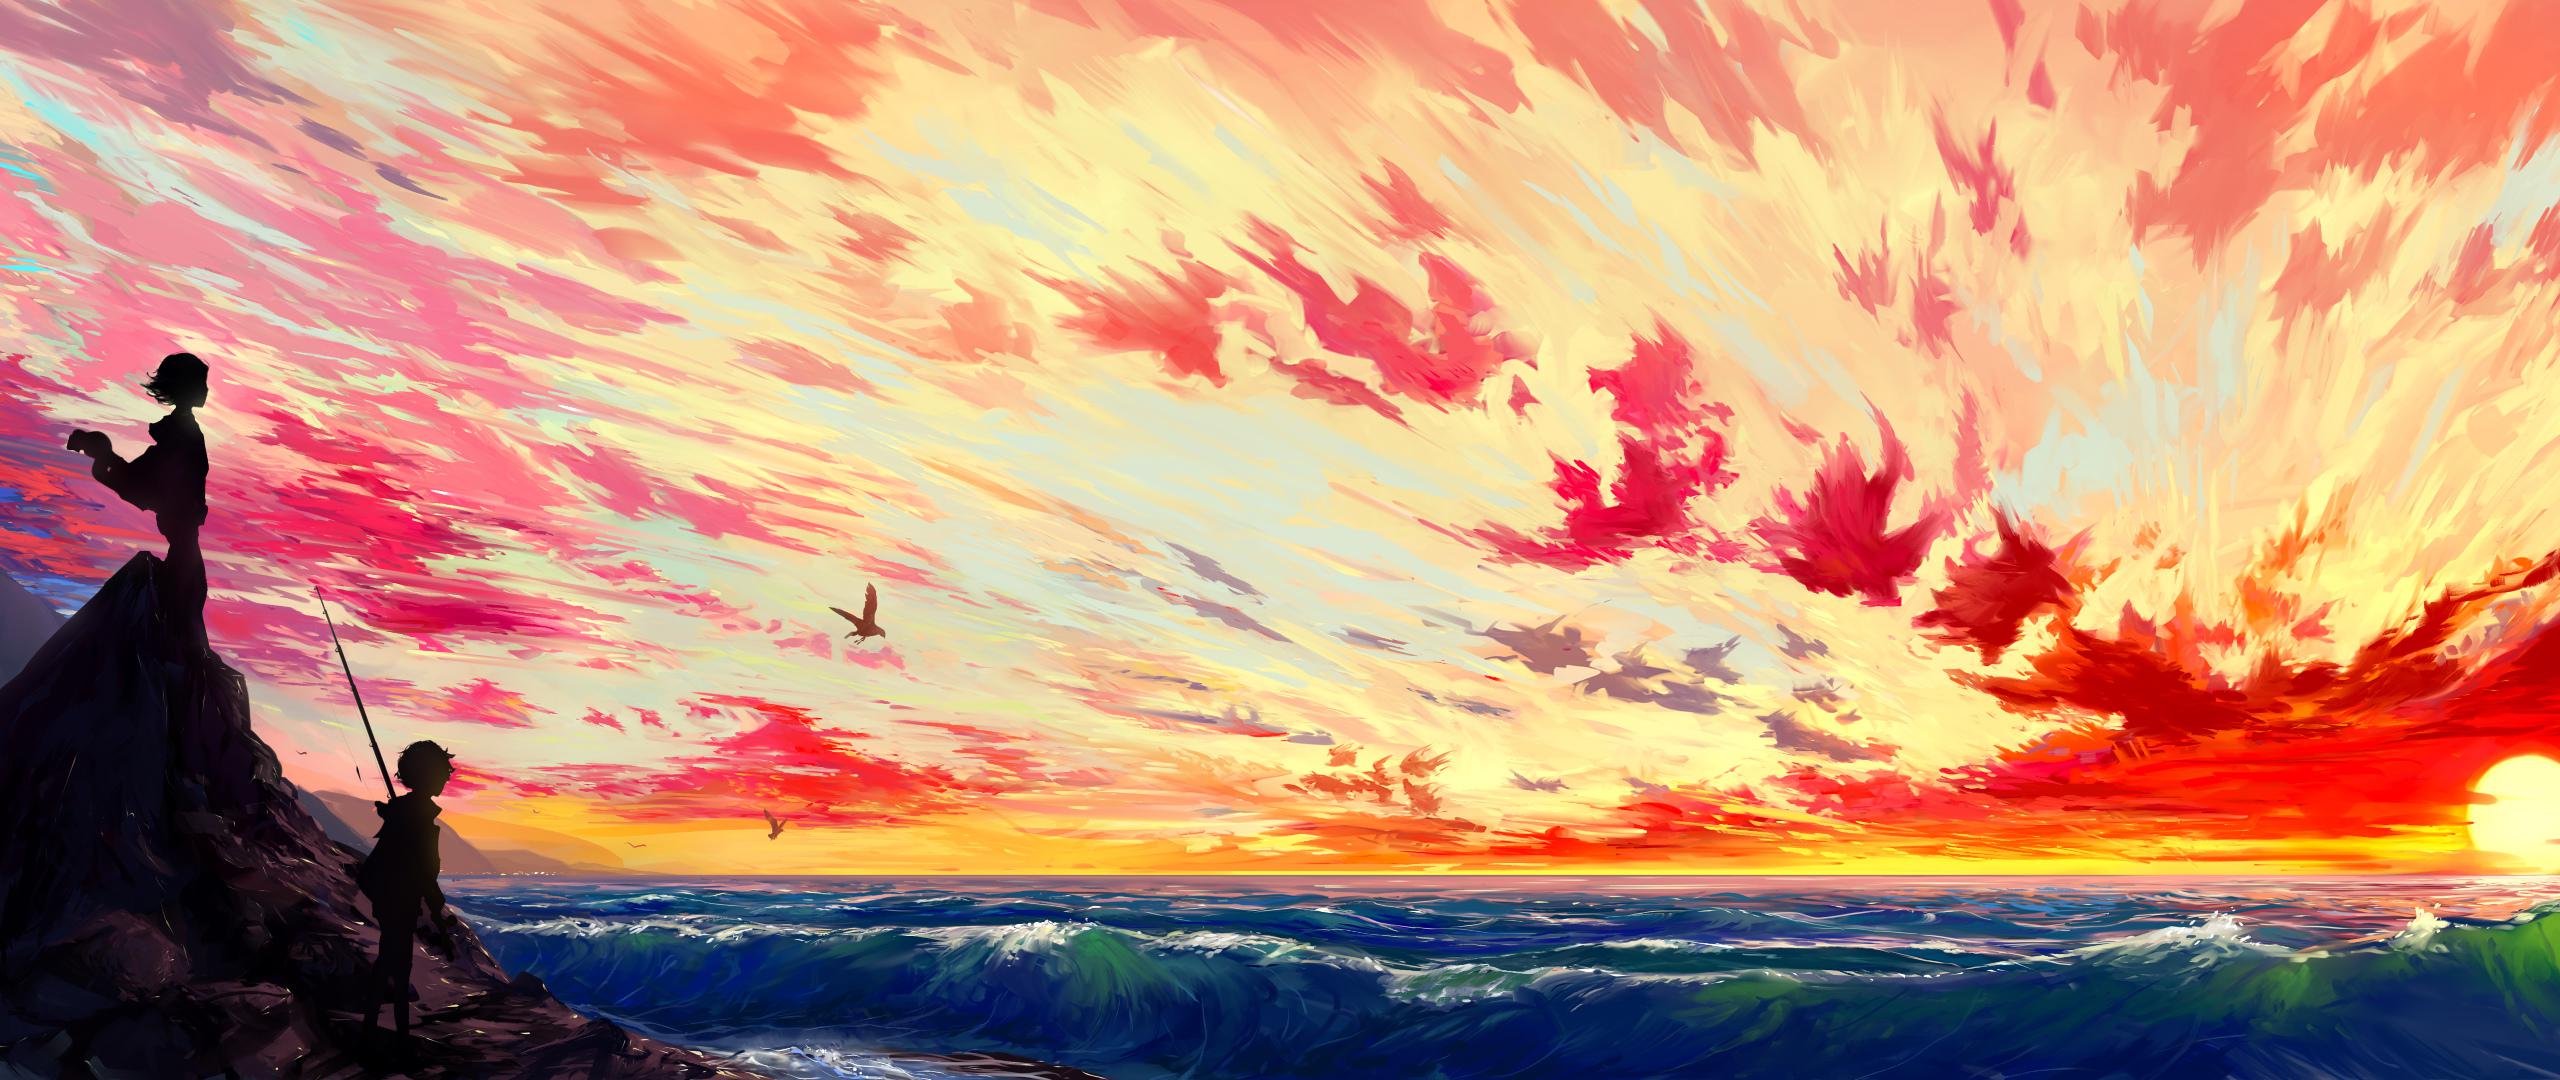 Painting 4K wallpaper for your desktop or mobile screen free and easy to download